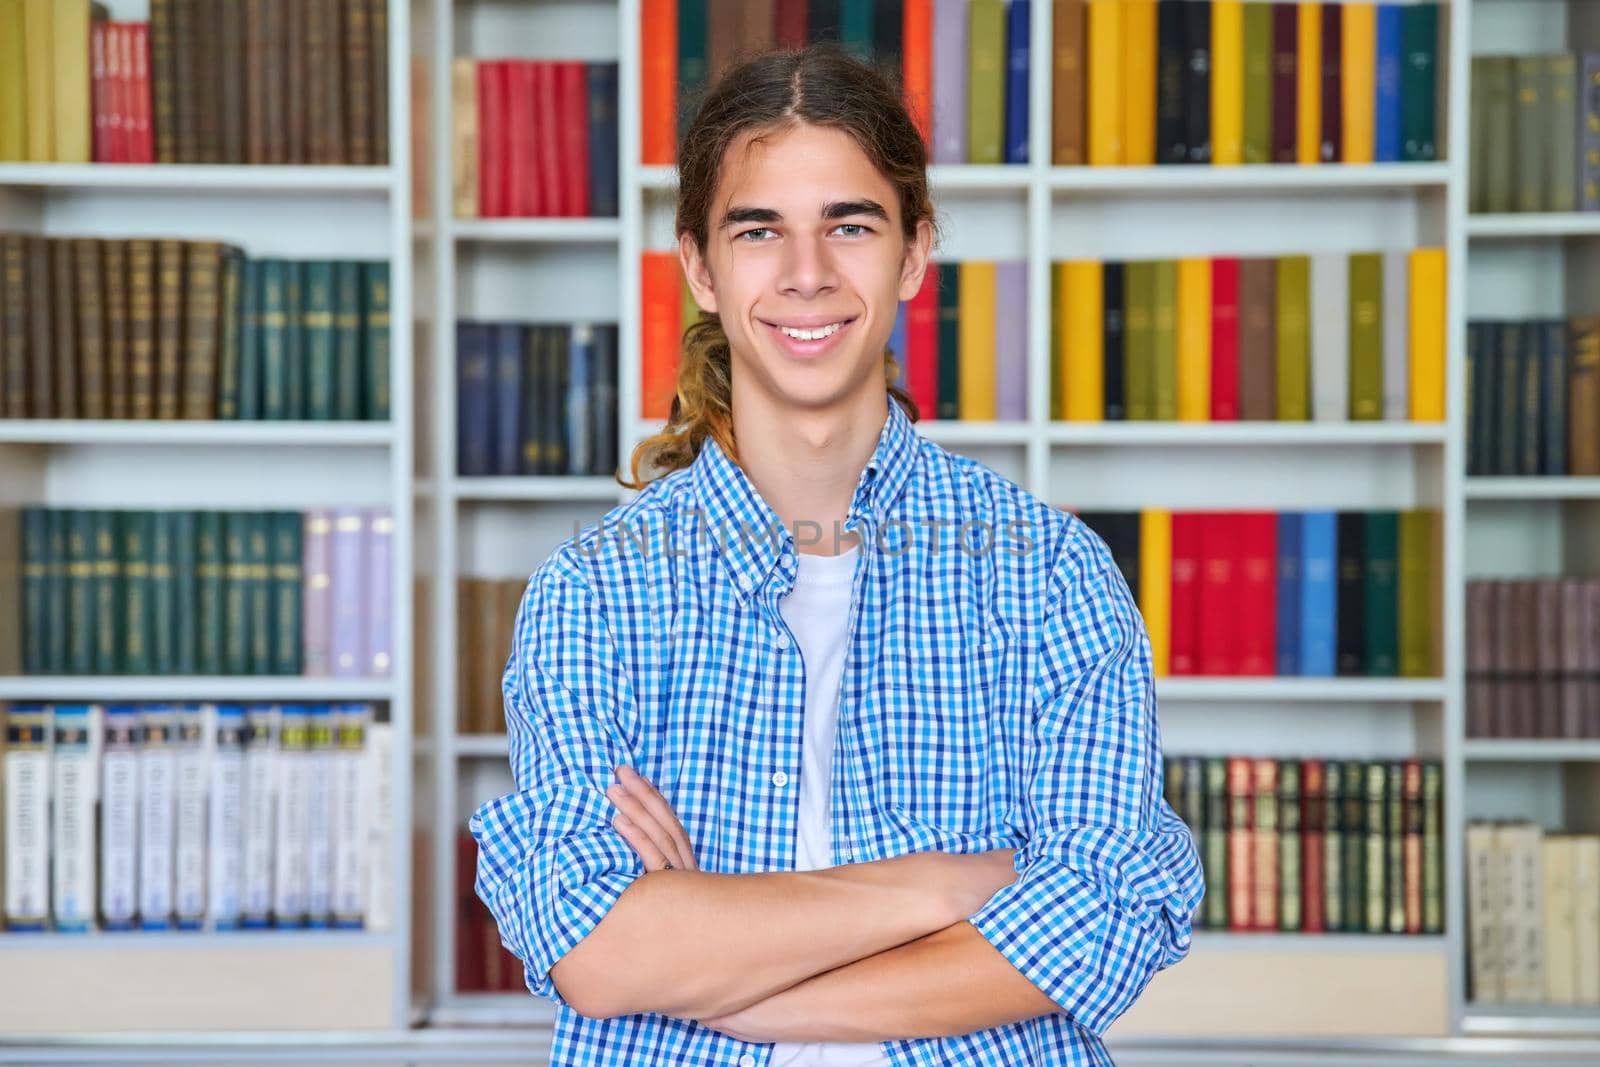 Single portrait of smiling confident male student teenager with crossed arms looking at camera in the library. School, education, knowledge, adolescence concept